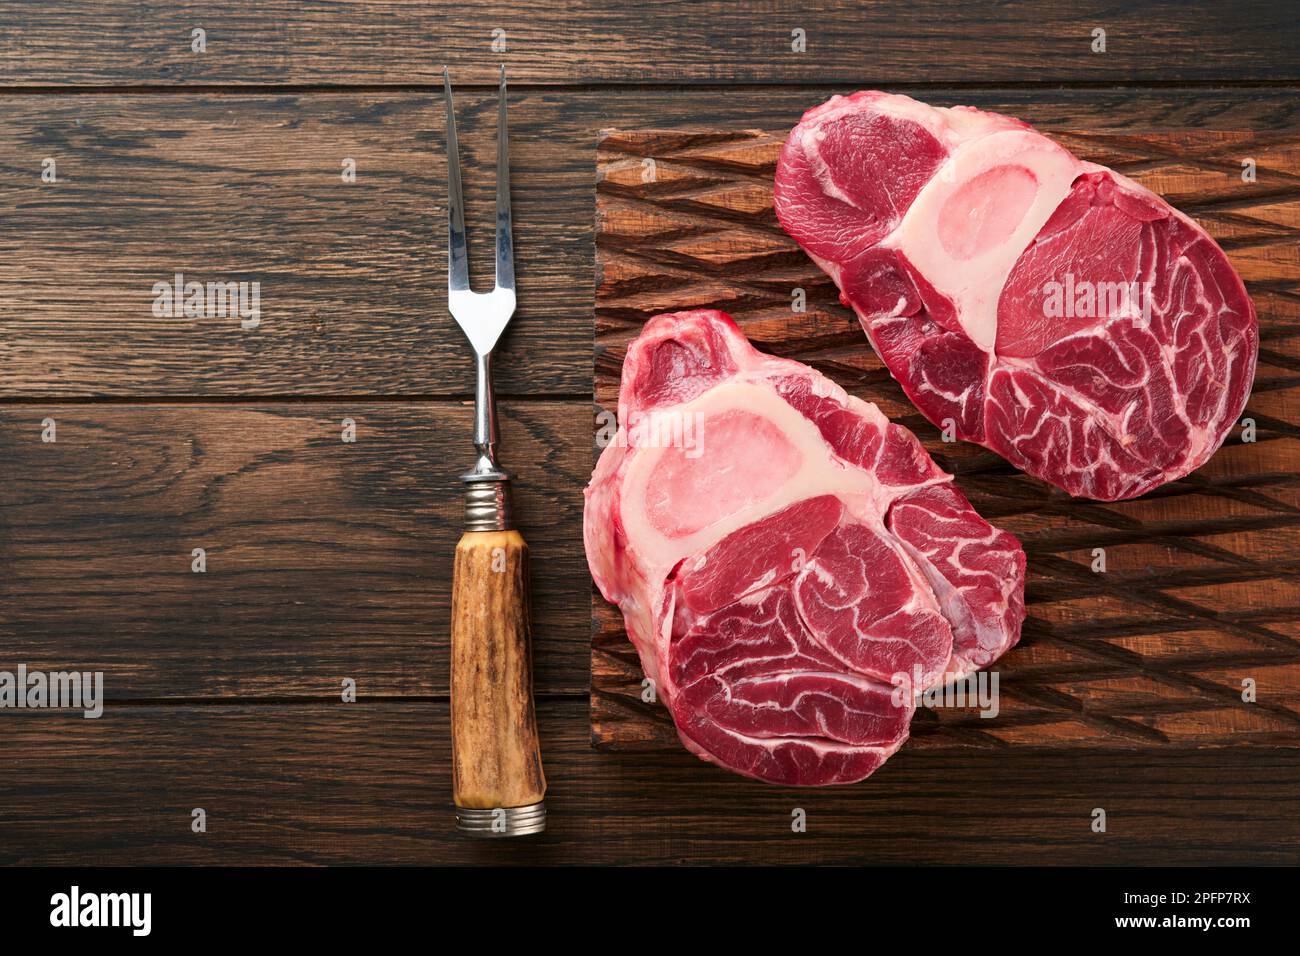 Osso Buco raw steak meat. Barbecue meat. Raw fresh cross cut veal shank and seasonings pepper, rosemary, thyme and salt on old wooden background. Beef Stock Photo